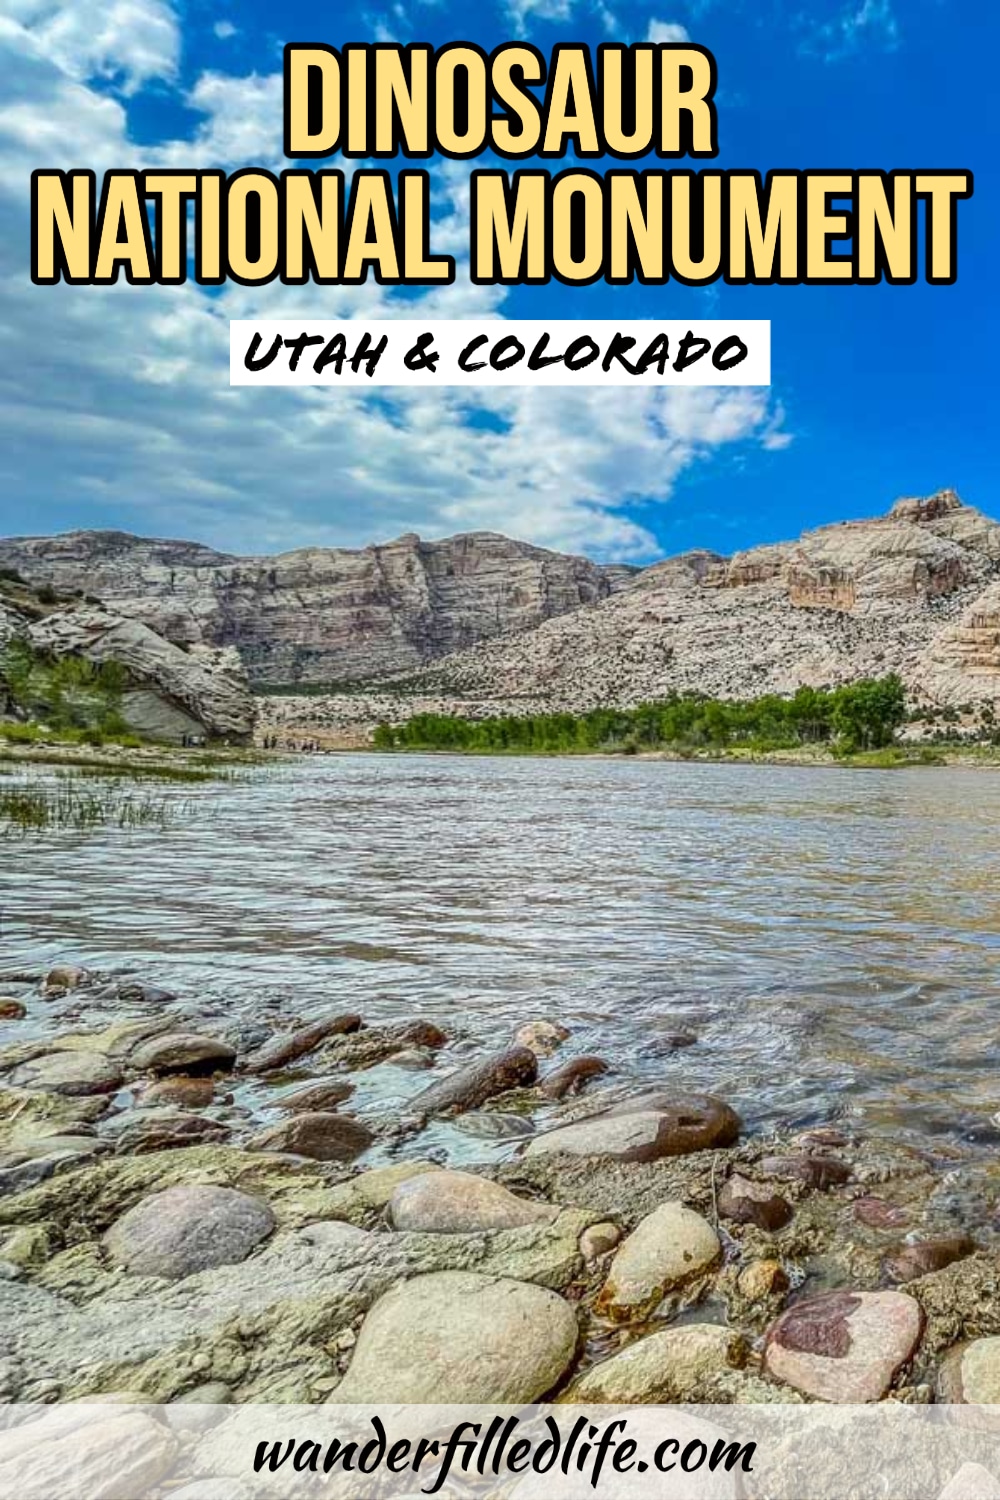 How to get the most out of a visit to Dinosaur National Monument, including where to touch fossils, hiking trails, scenic drives, and more!